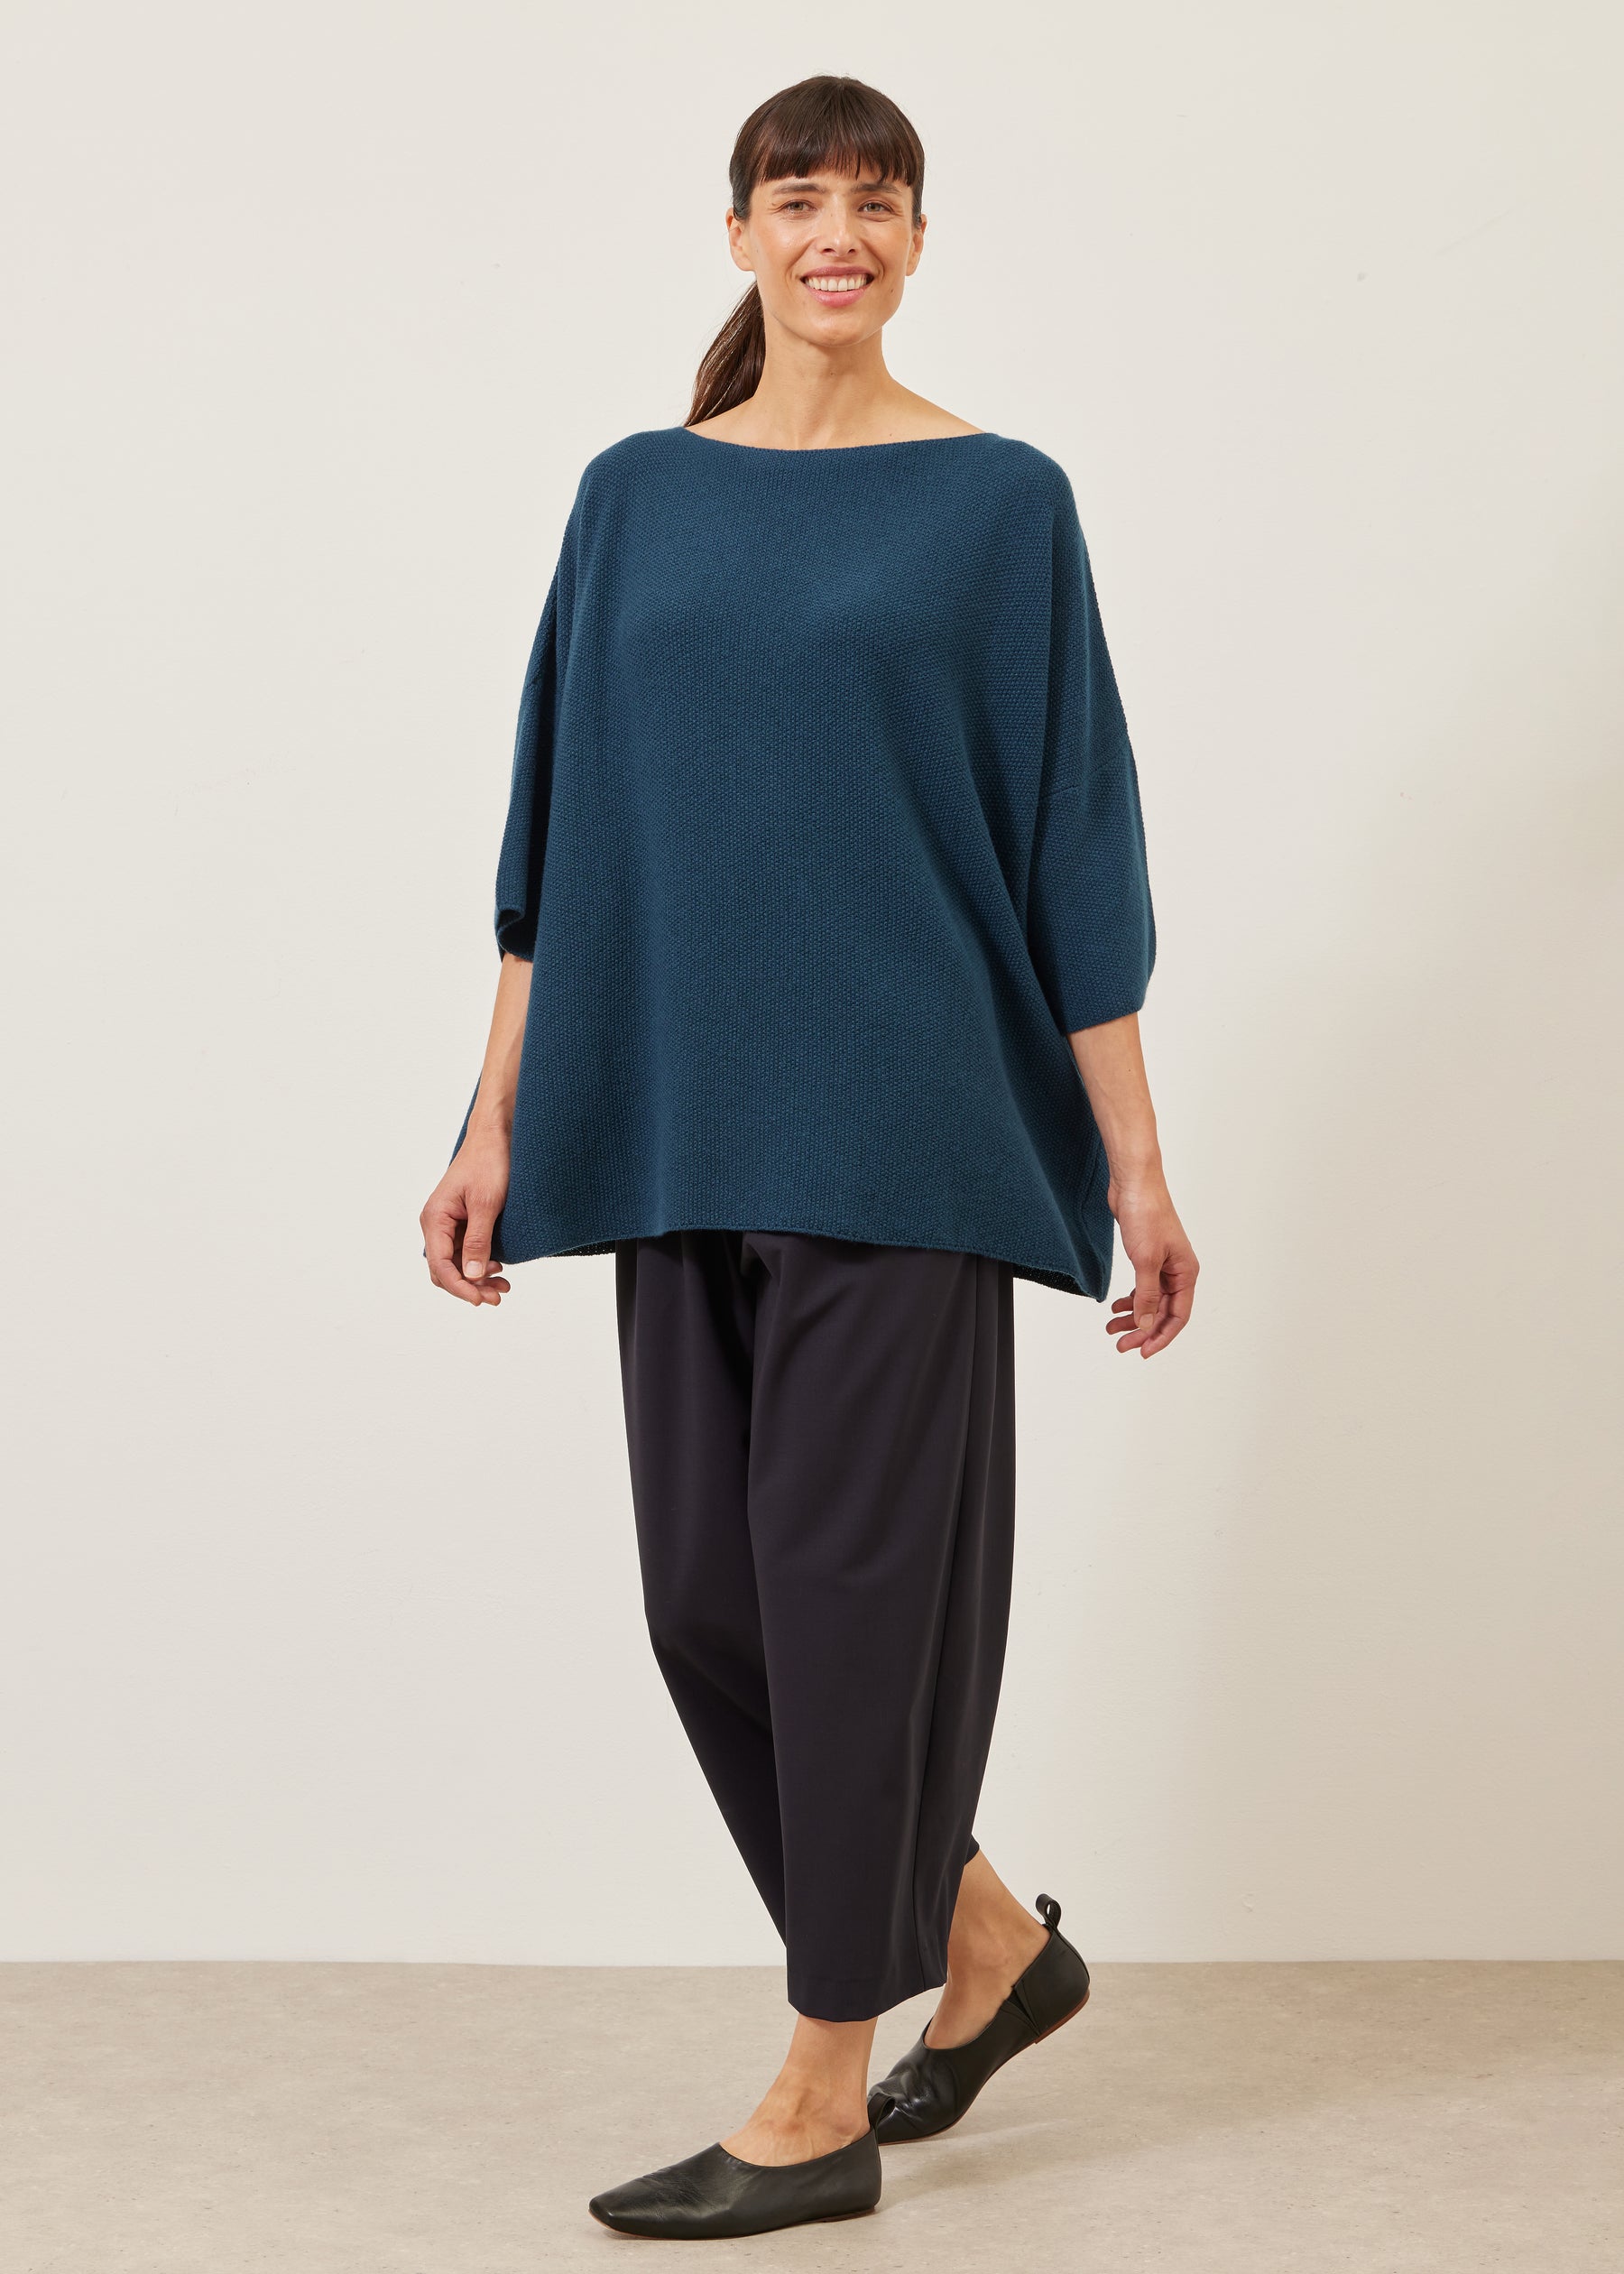 square 3/4 sleeve sweater  - long